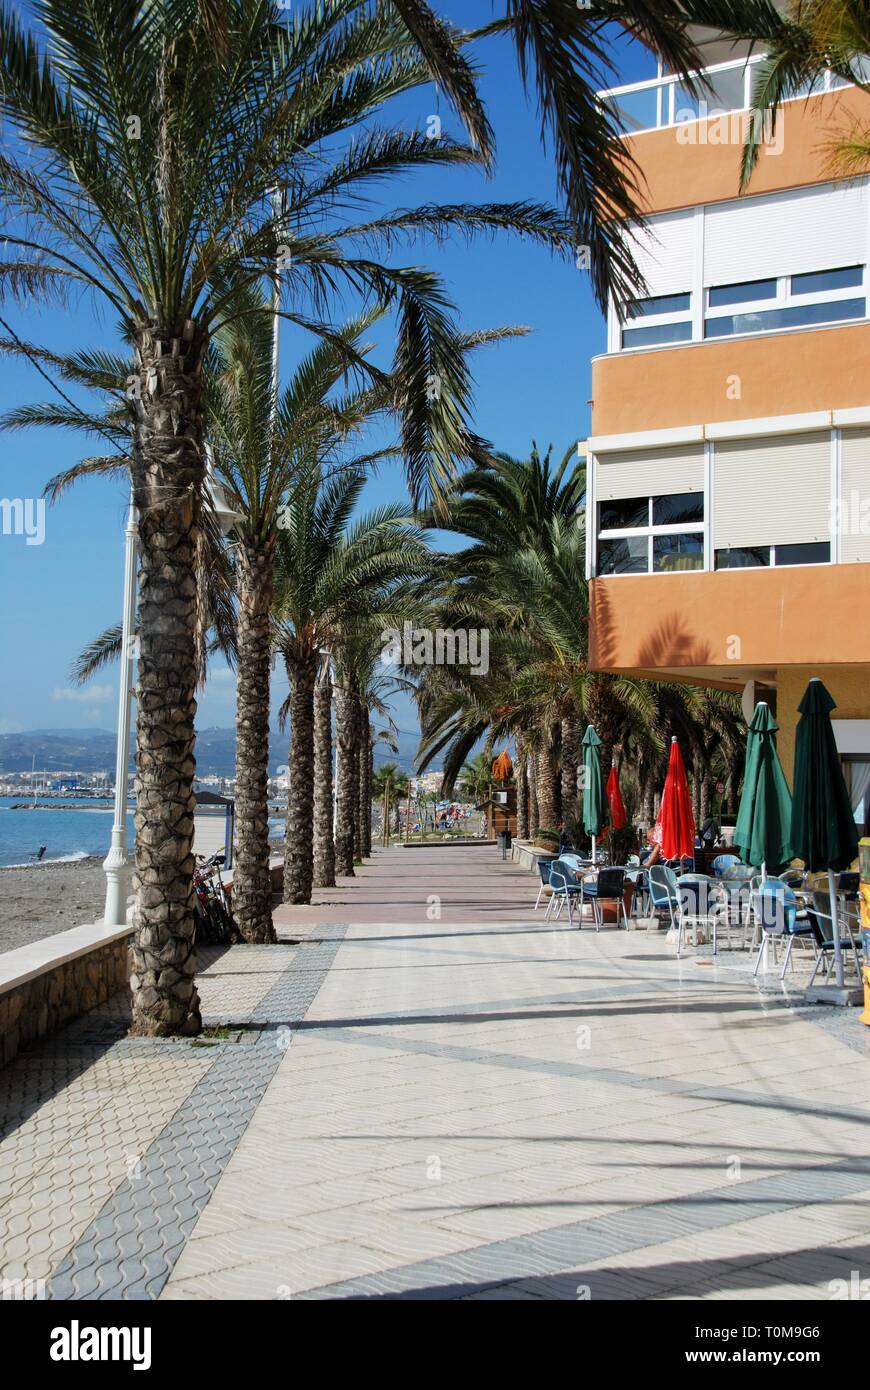 View along the palm tree lined promenade with the sea and beach to the left hand side, Lagos, Malaga Province, Andalusia, Spain, Western Europe. Stock Photo